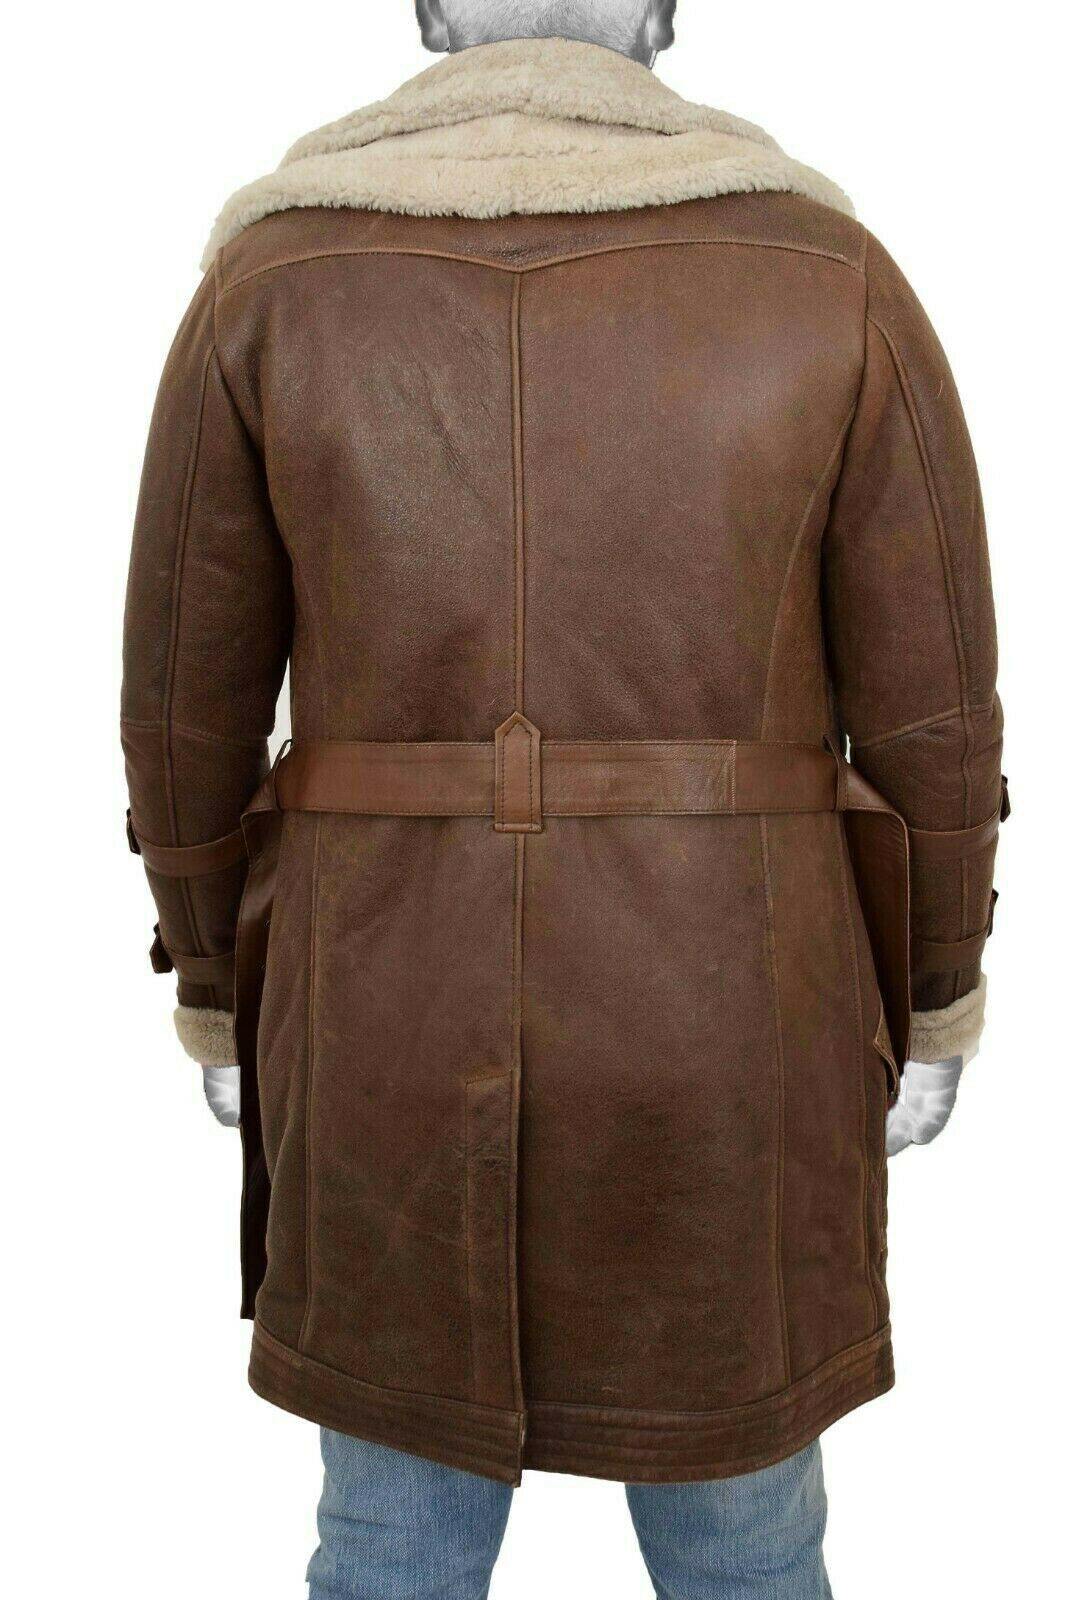 Spine Spark Men's Shearling Brown Duffle Coat Leather Jacket